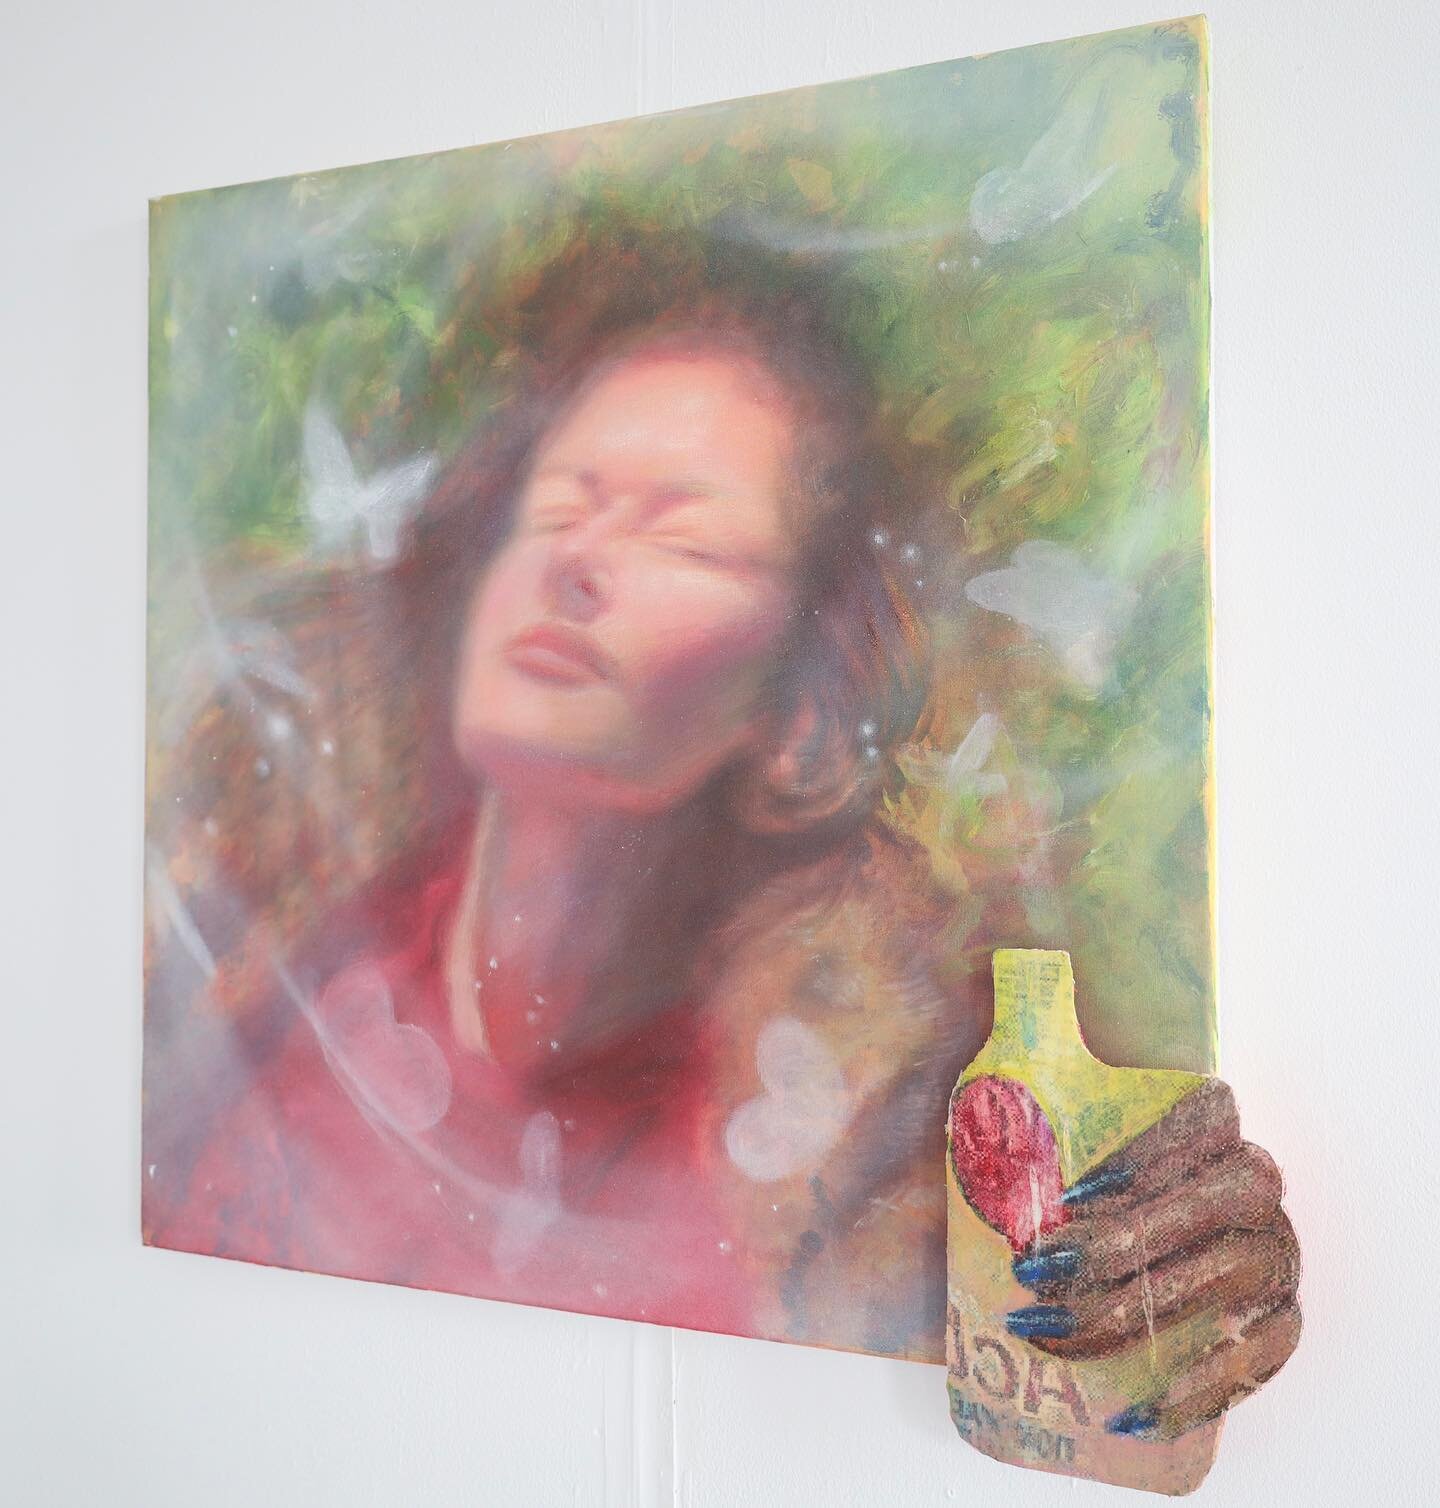 one of the paintings from my recent degree show! 
&lsquo;𝑀𝒶𝓂 𝒶𝓃𝒹 𝒱𝒶𝓅𝑒&rsquo;

Acrylic, water-soluble pastels, spraypaint, oils on canvas
&amp;  image-transferred hand holding an Actimel on foam board 

@sarahjanecleary @setuvisualartdept 💨